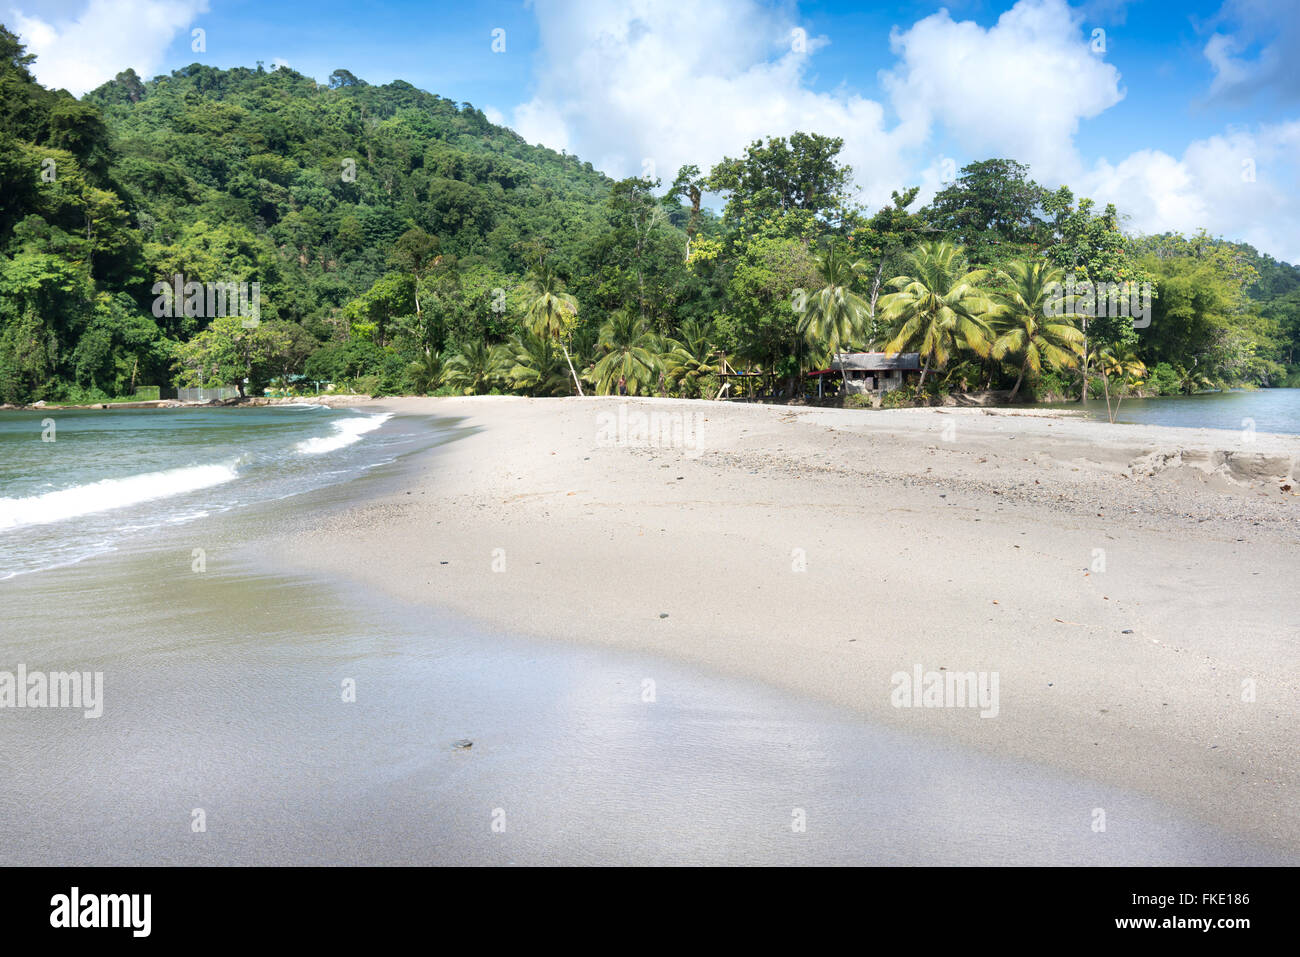 Scenic view of exotic beach with palm trees, Trinidad, Trinidad and Tobago Stock Photo